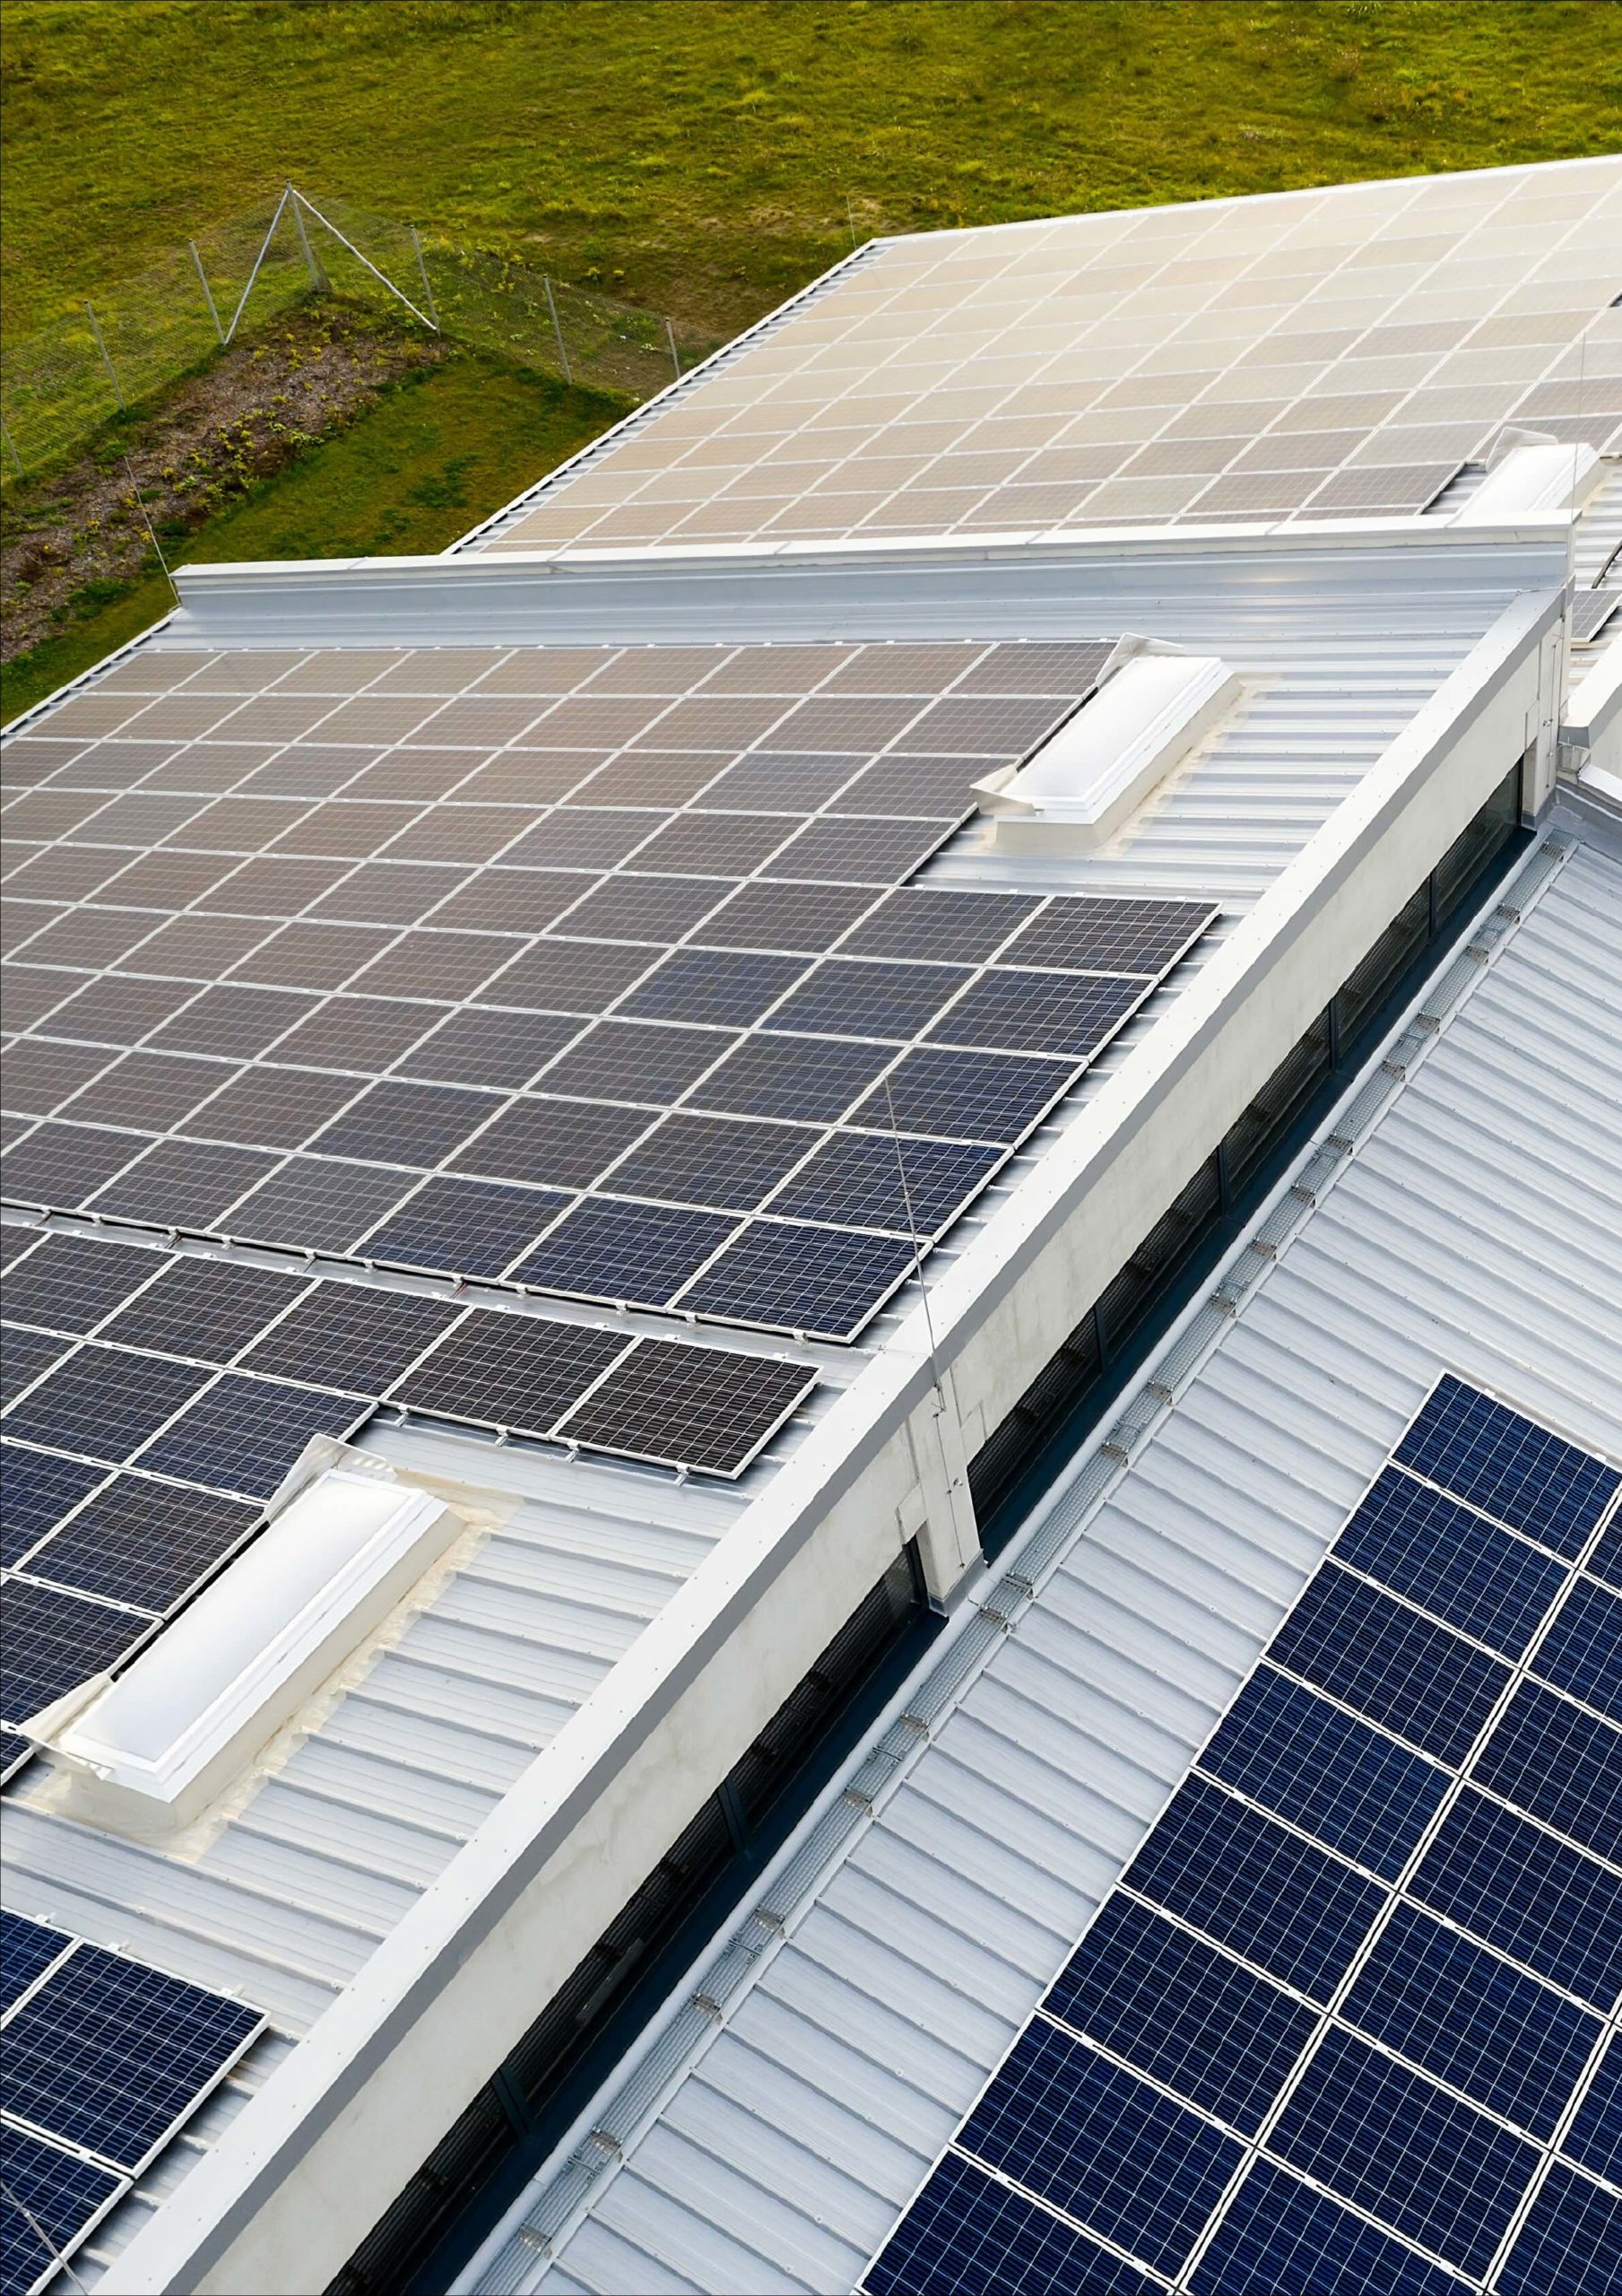 Introducing solar photovoltaics (PV) for your business